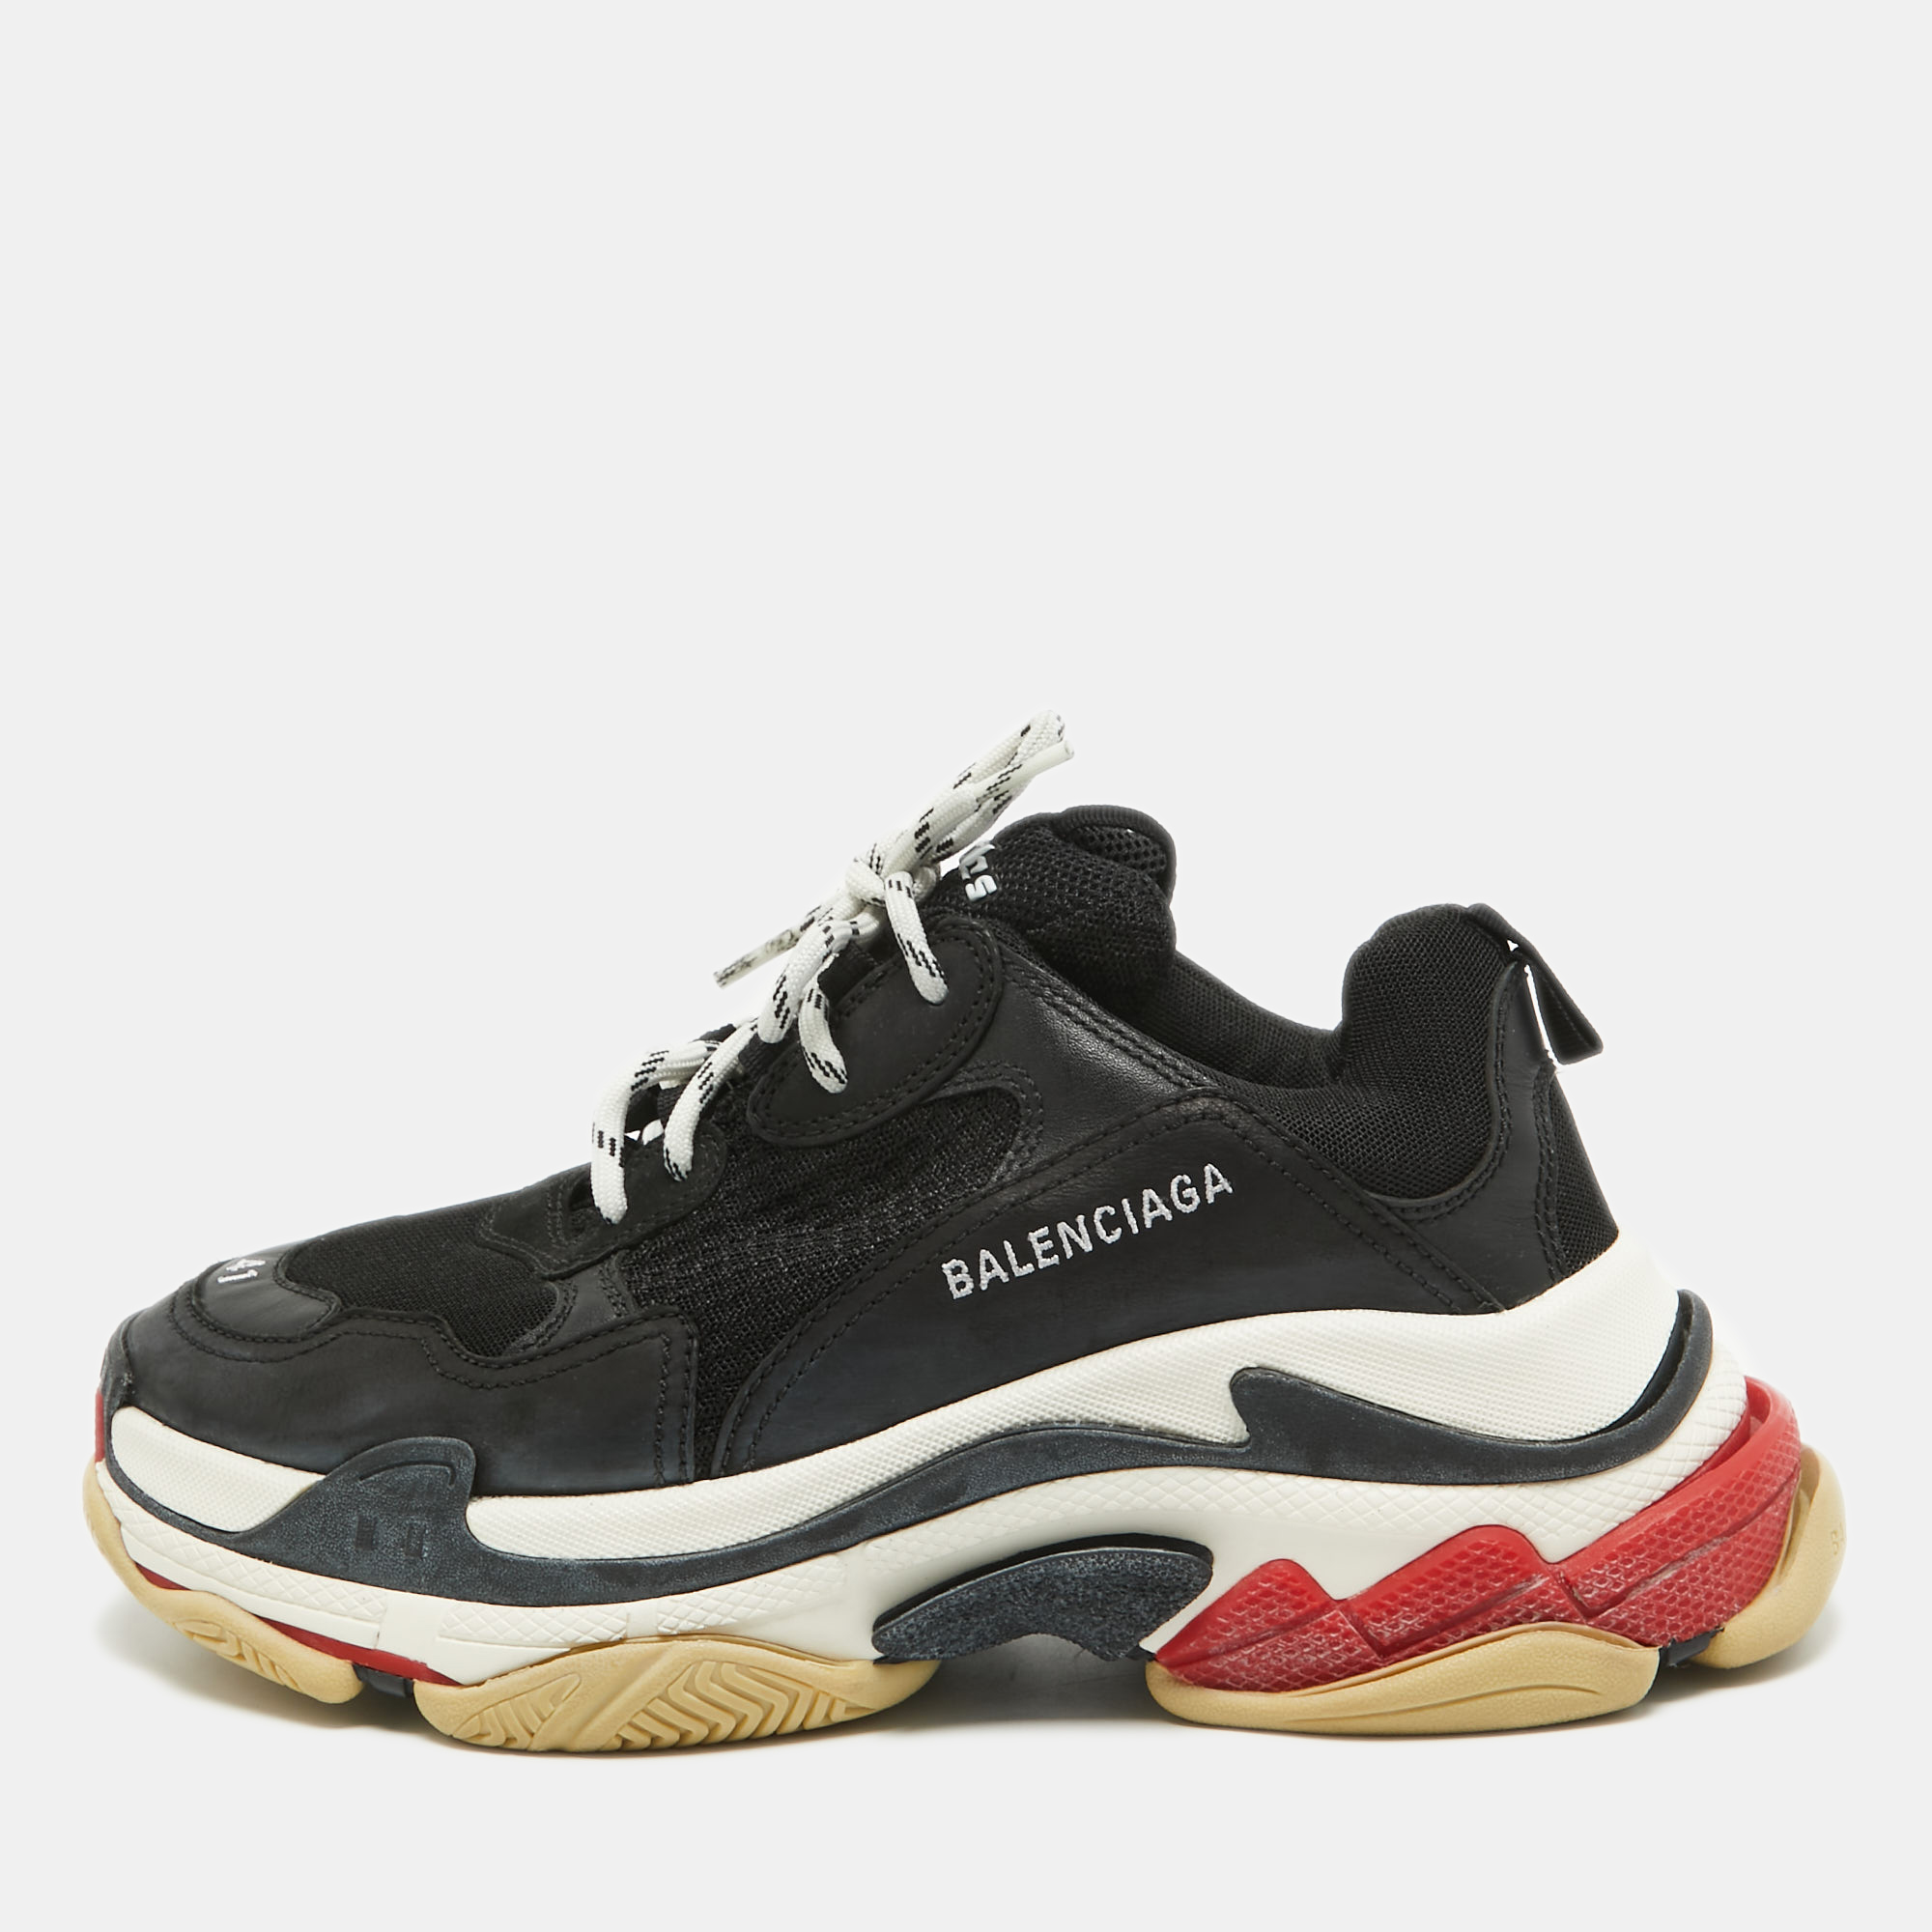 Balenciaga Black Mesh And Leather Triple S Low Top Sneakers Size 40